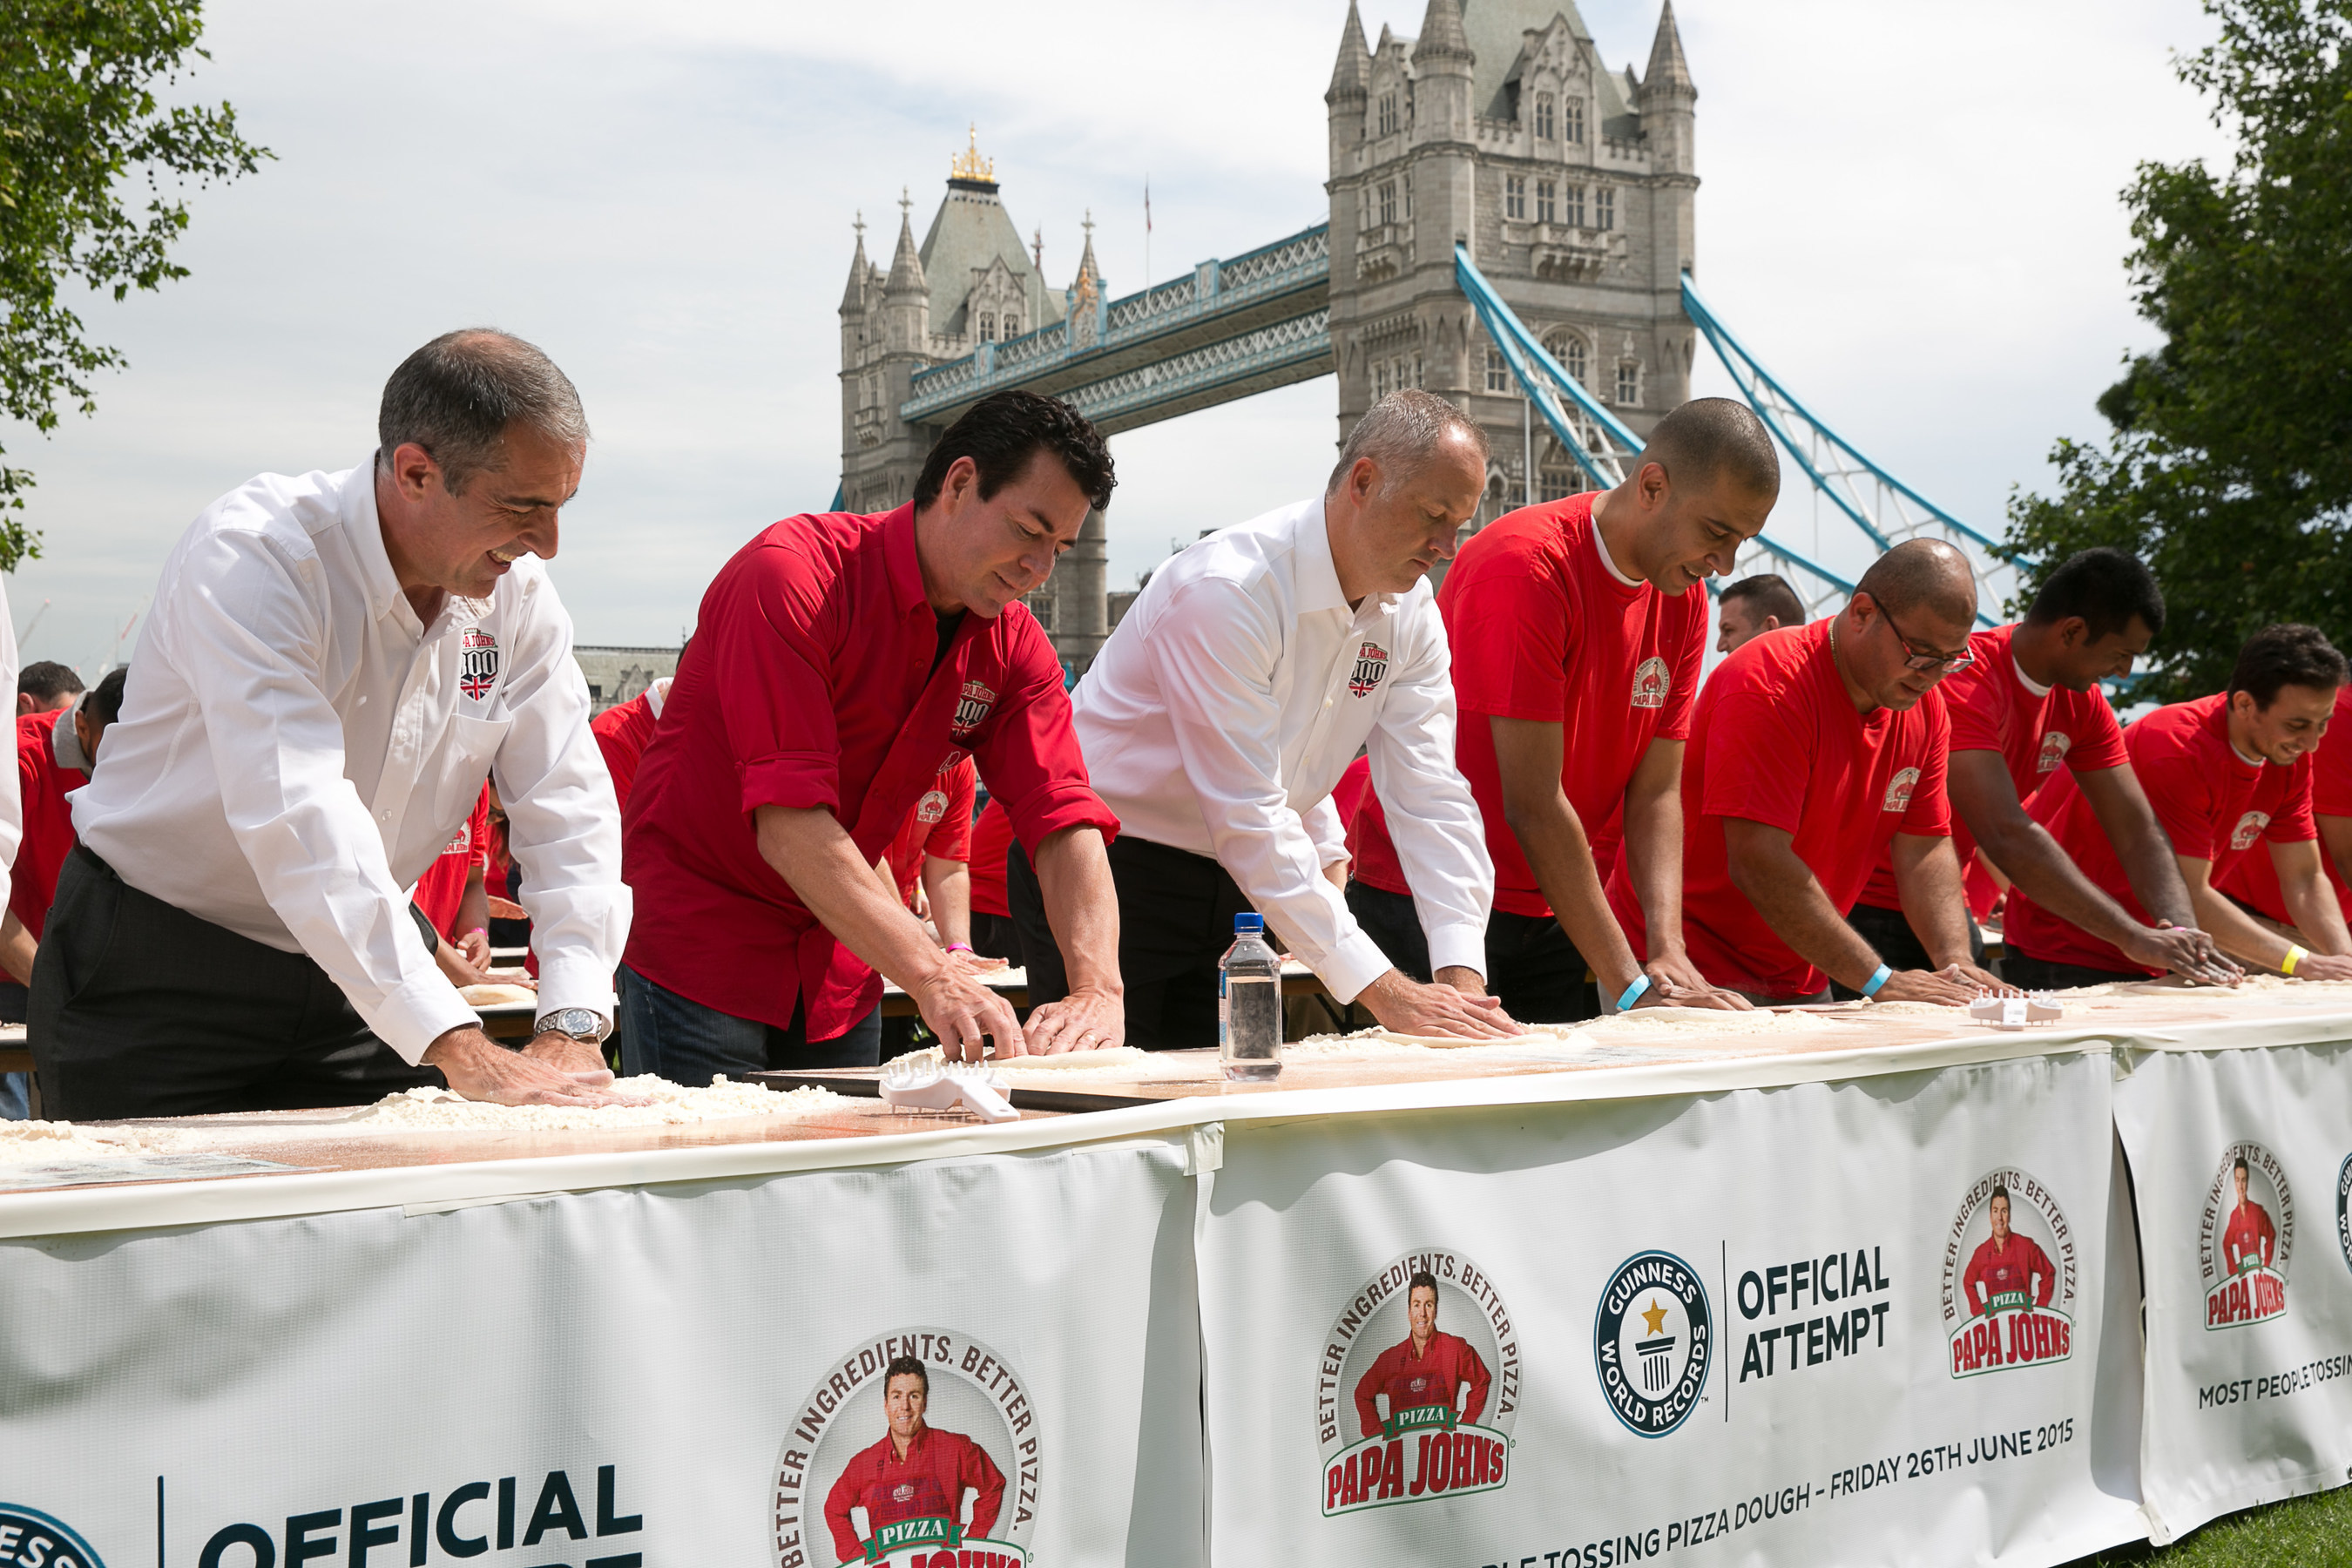 Papa John's Founder, John Schnatter, joins in with his employees to help Papa John's break the GUINNESS WORLD RECORD for the most number of people tossing pizza dough simultaneously. (PRNewsFoto/Papa John's) (PRNewsFoto/Papa John's)